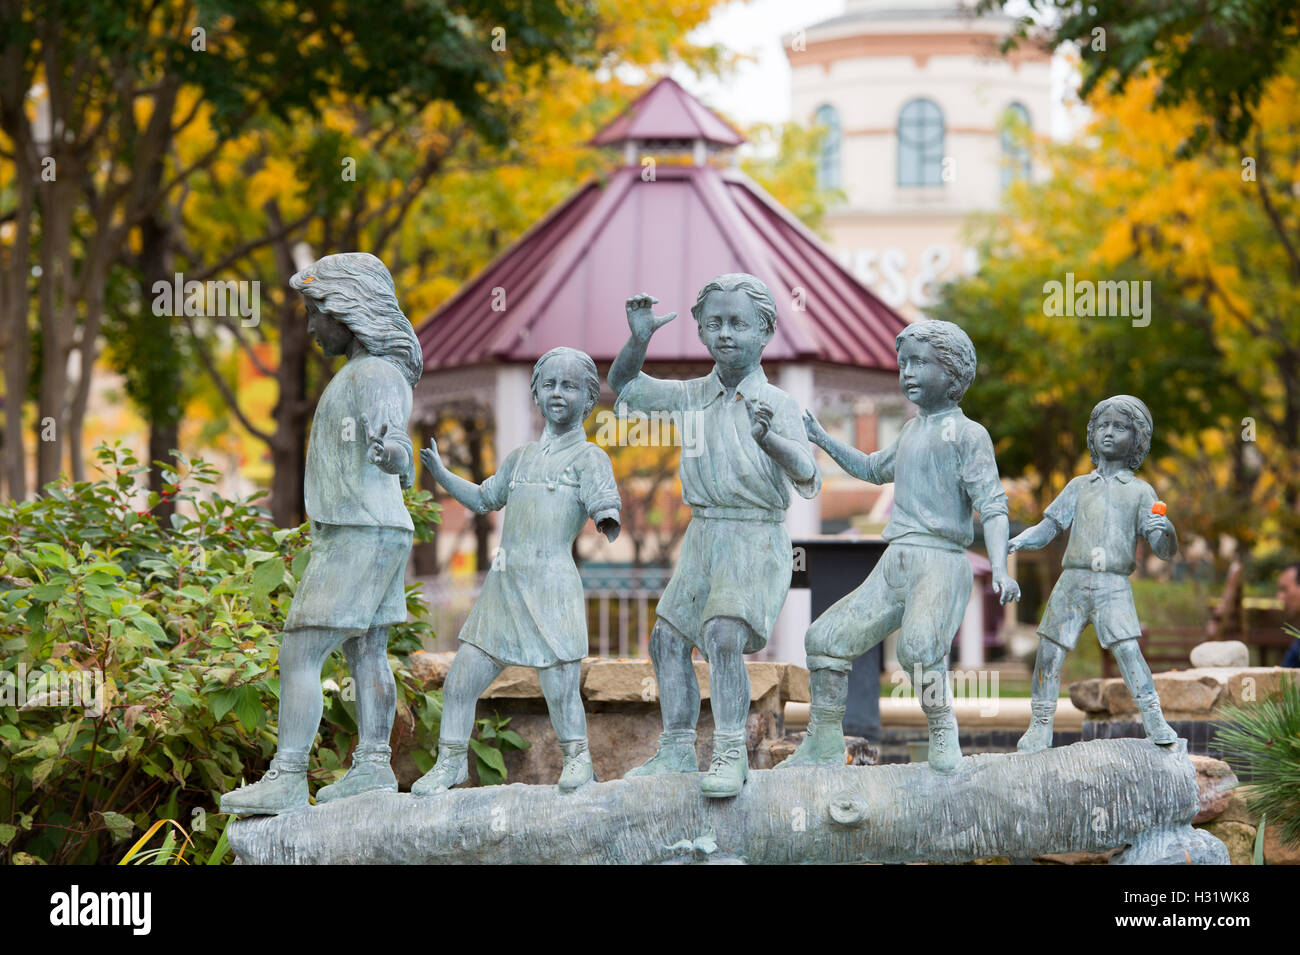 Outdoor sculpture of children playing on a log in Arlington, Virginia. Stock Photo